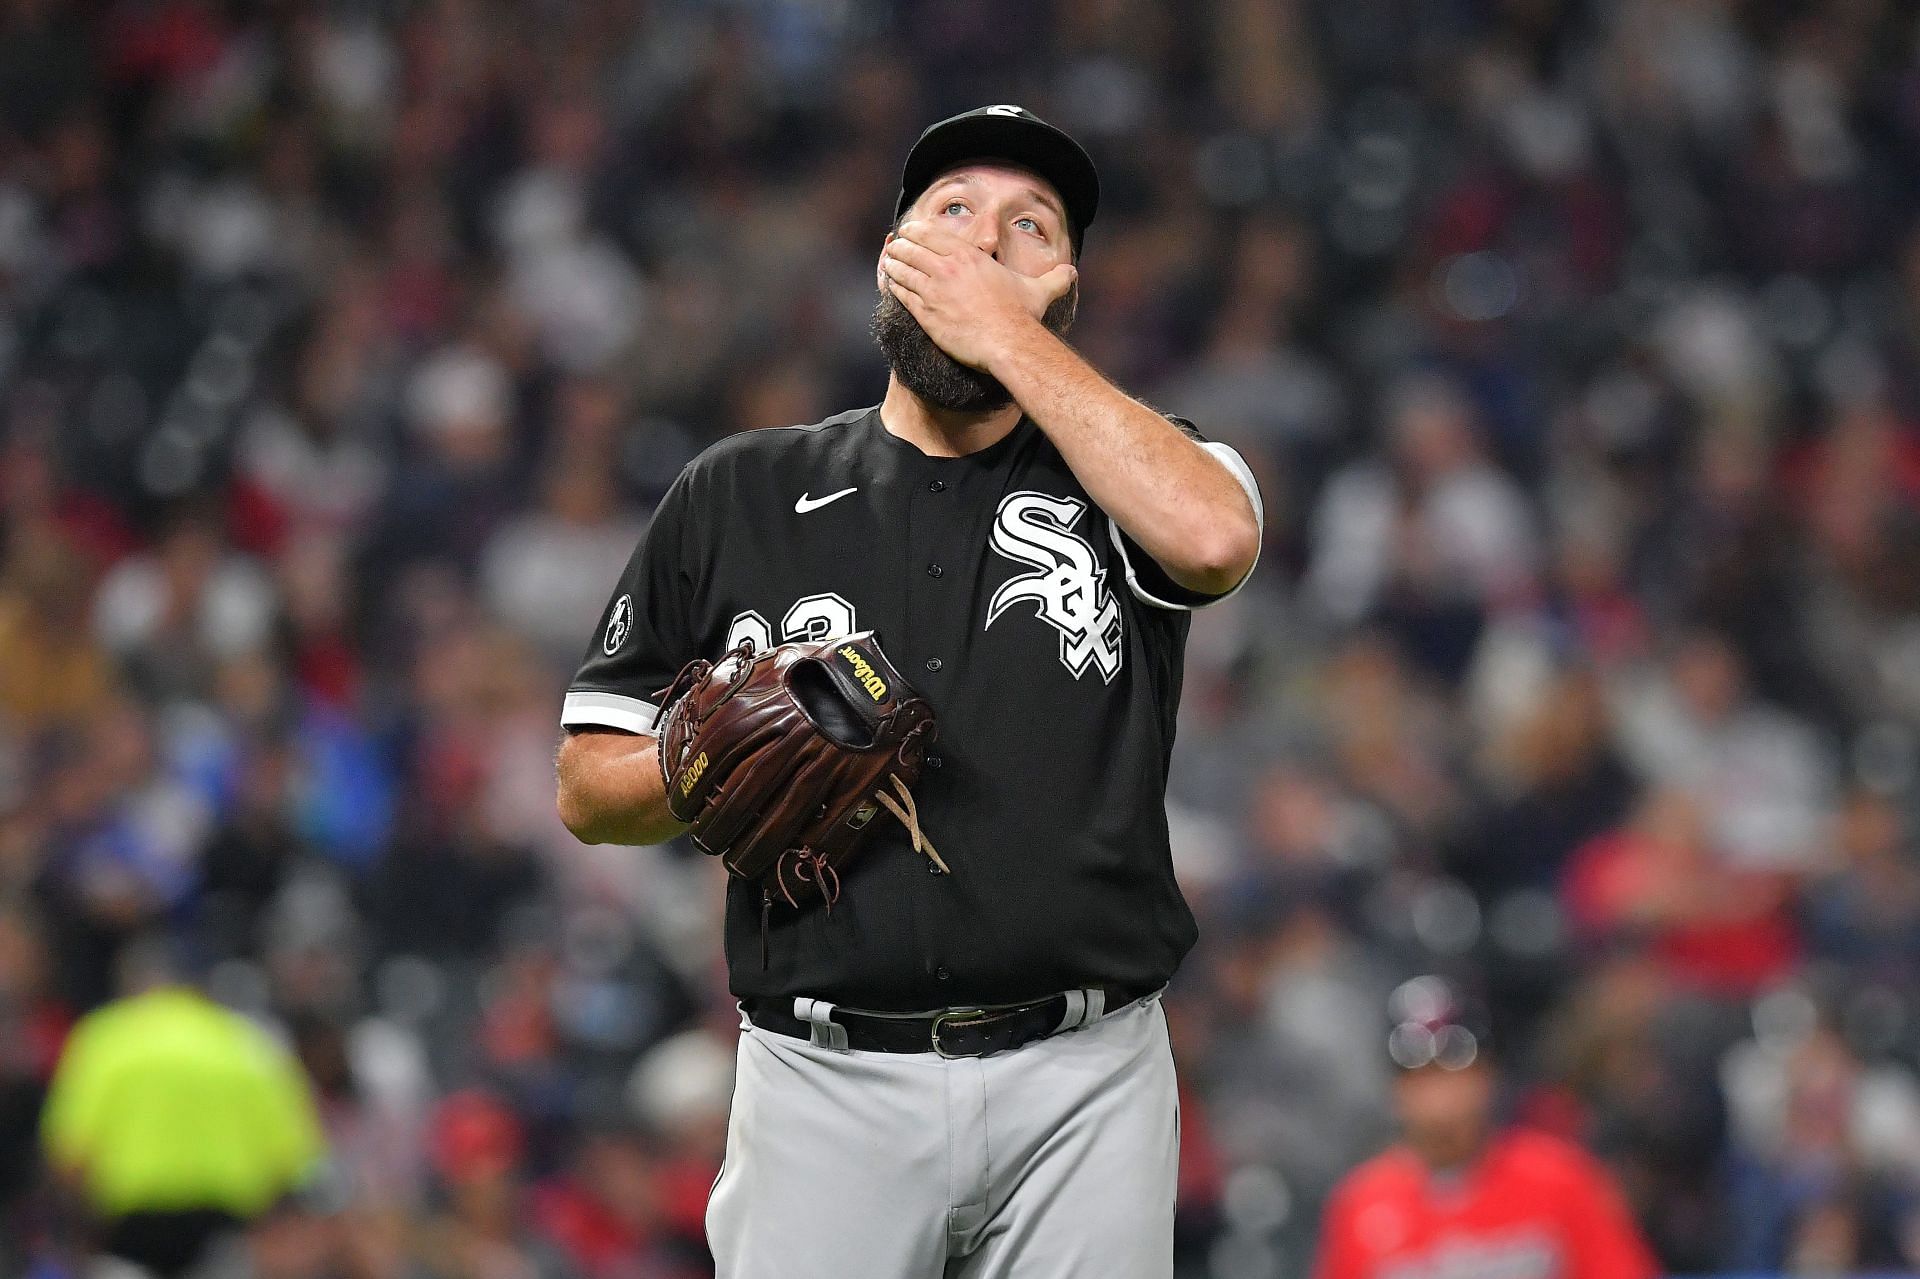 White Sox pitcher Lance Lynn out at least 1 month with knee injury